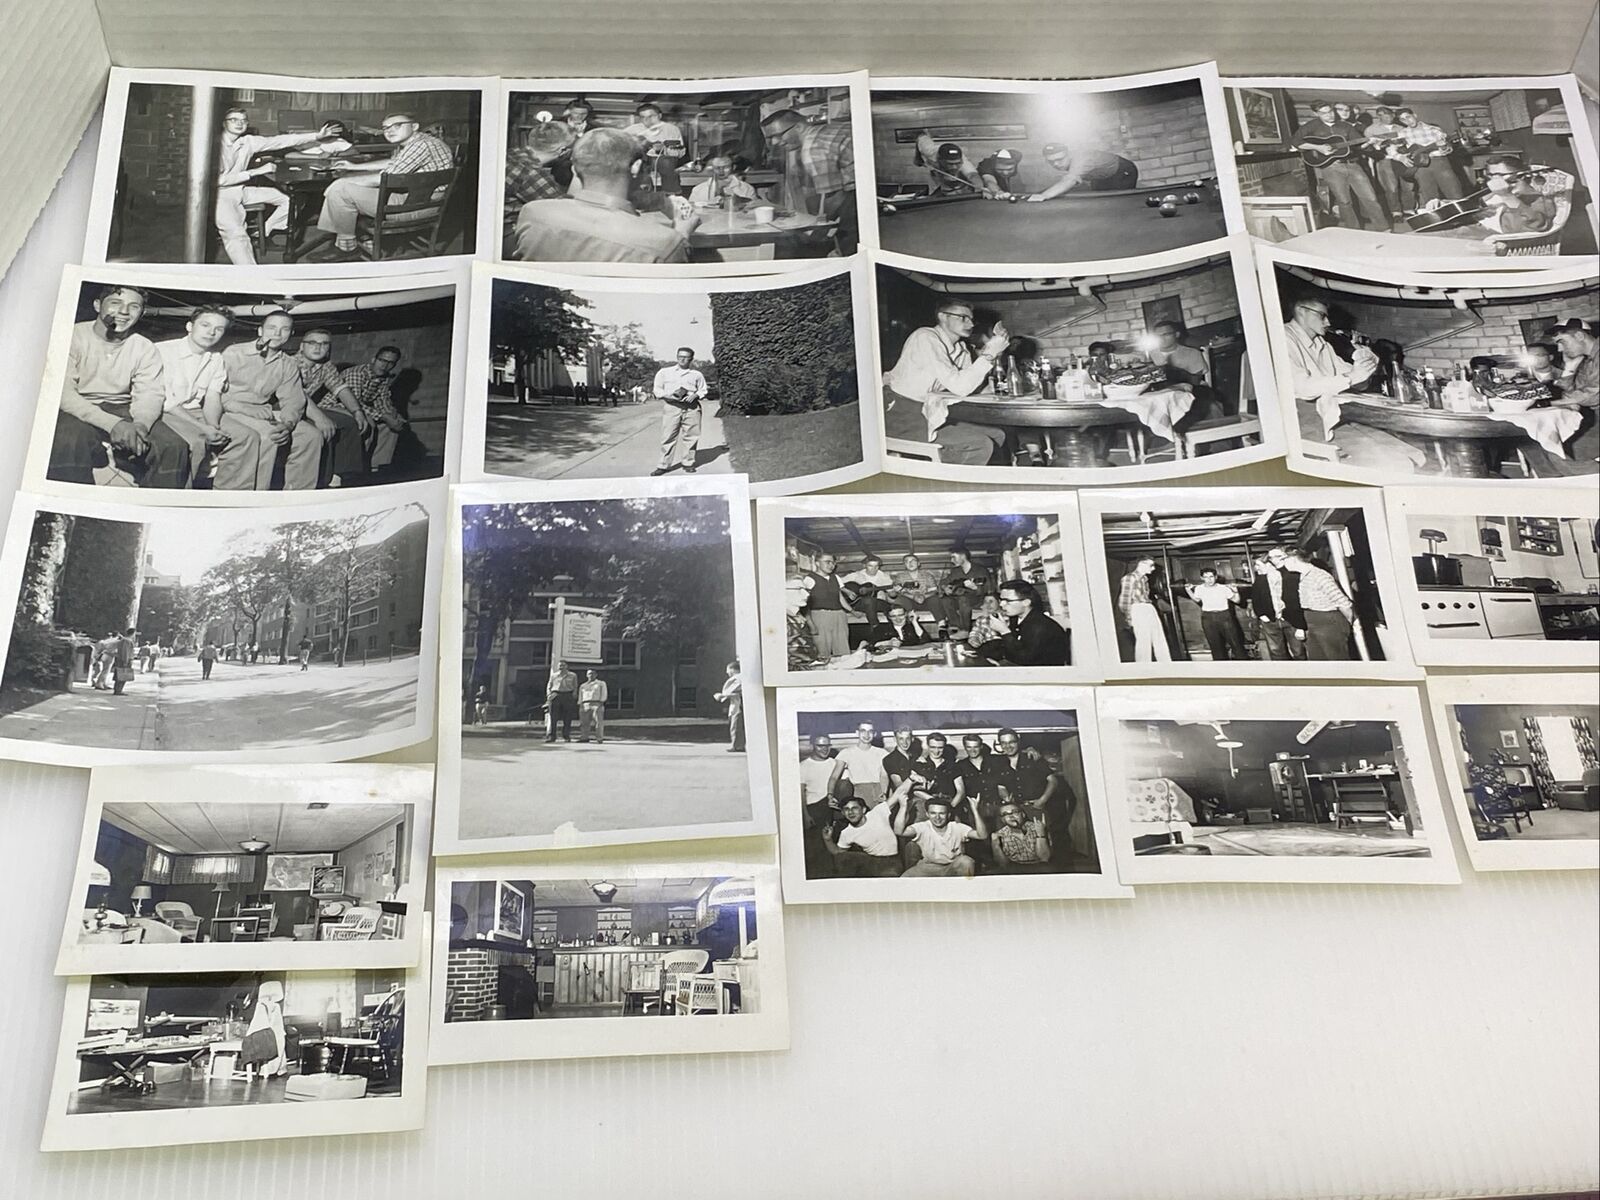 1950s College University Party Hanging Out Living Space Pinball Vtg Photographs